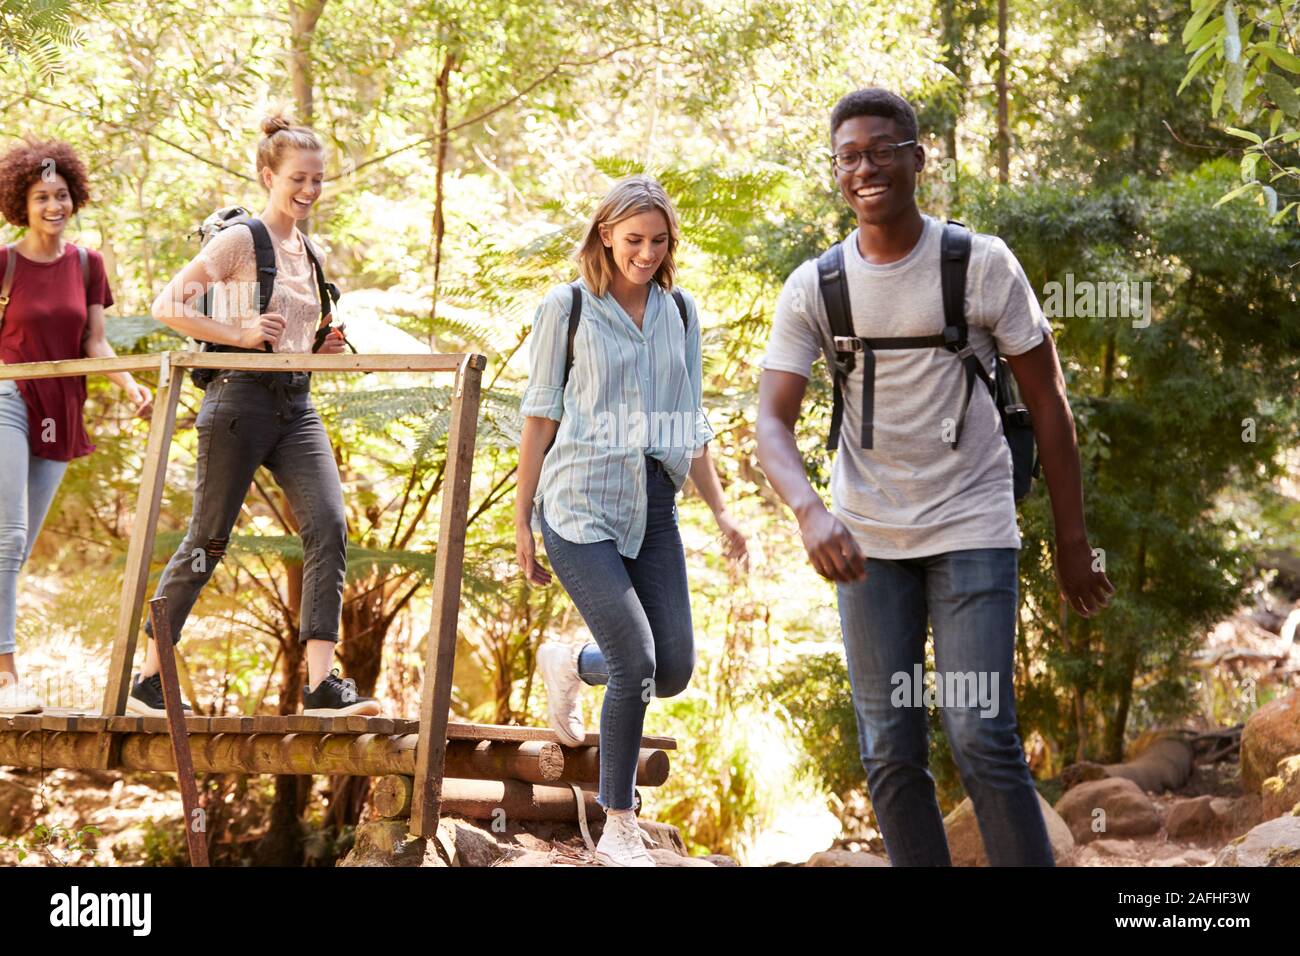 Young adult friends crossing a footbridge during a hike in a forest, full length Stock Photo